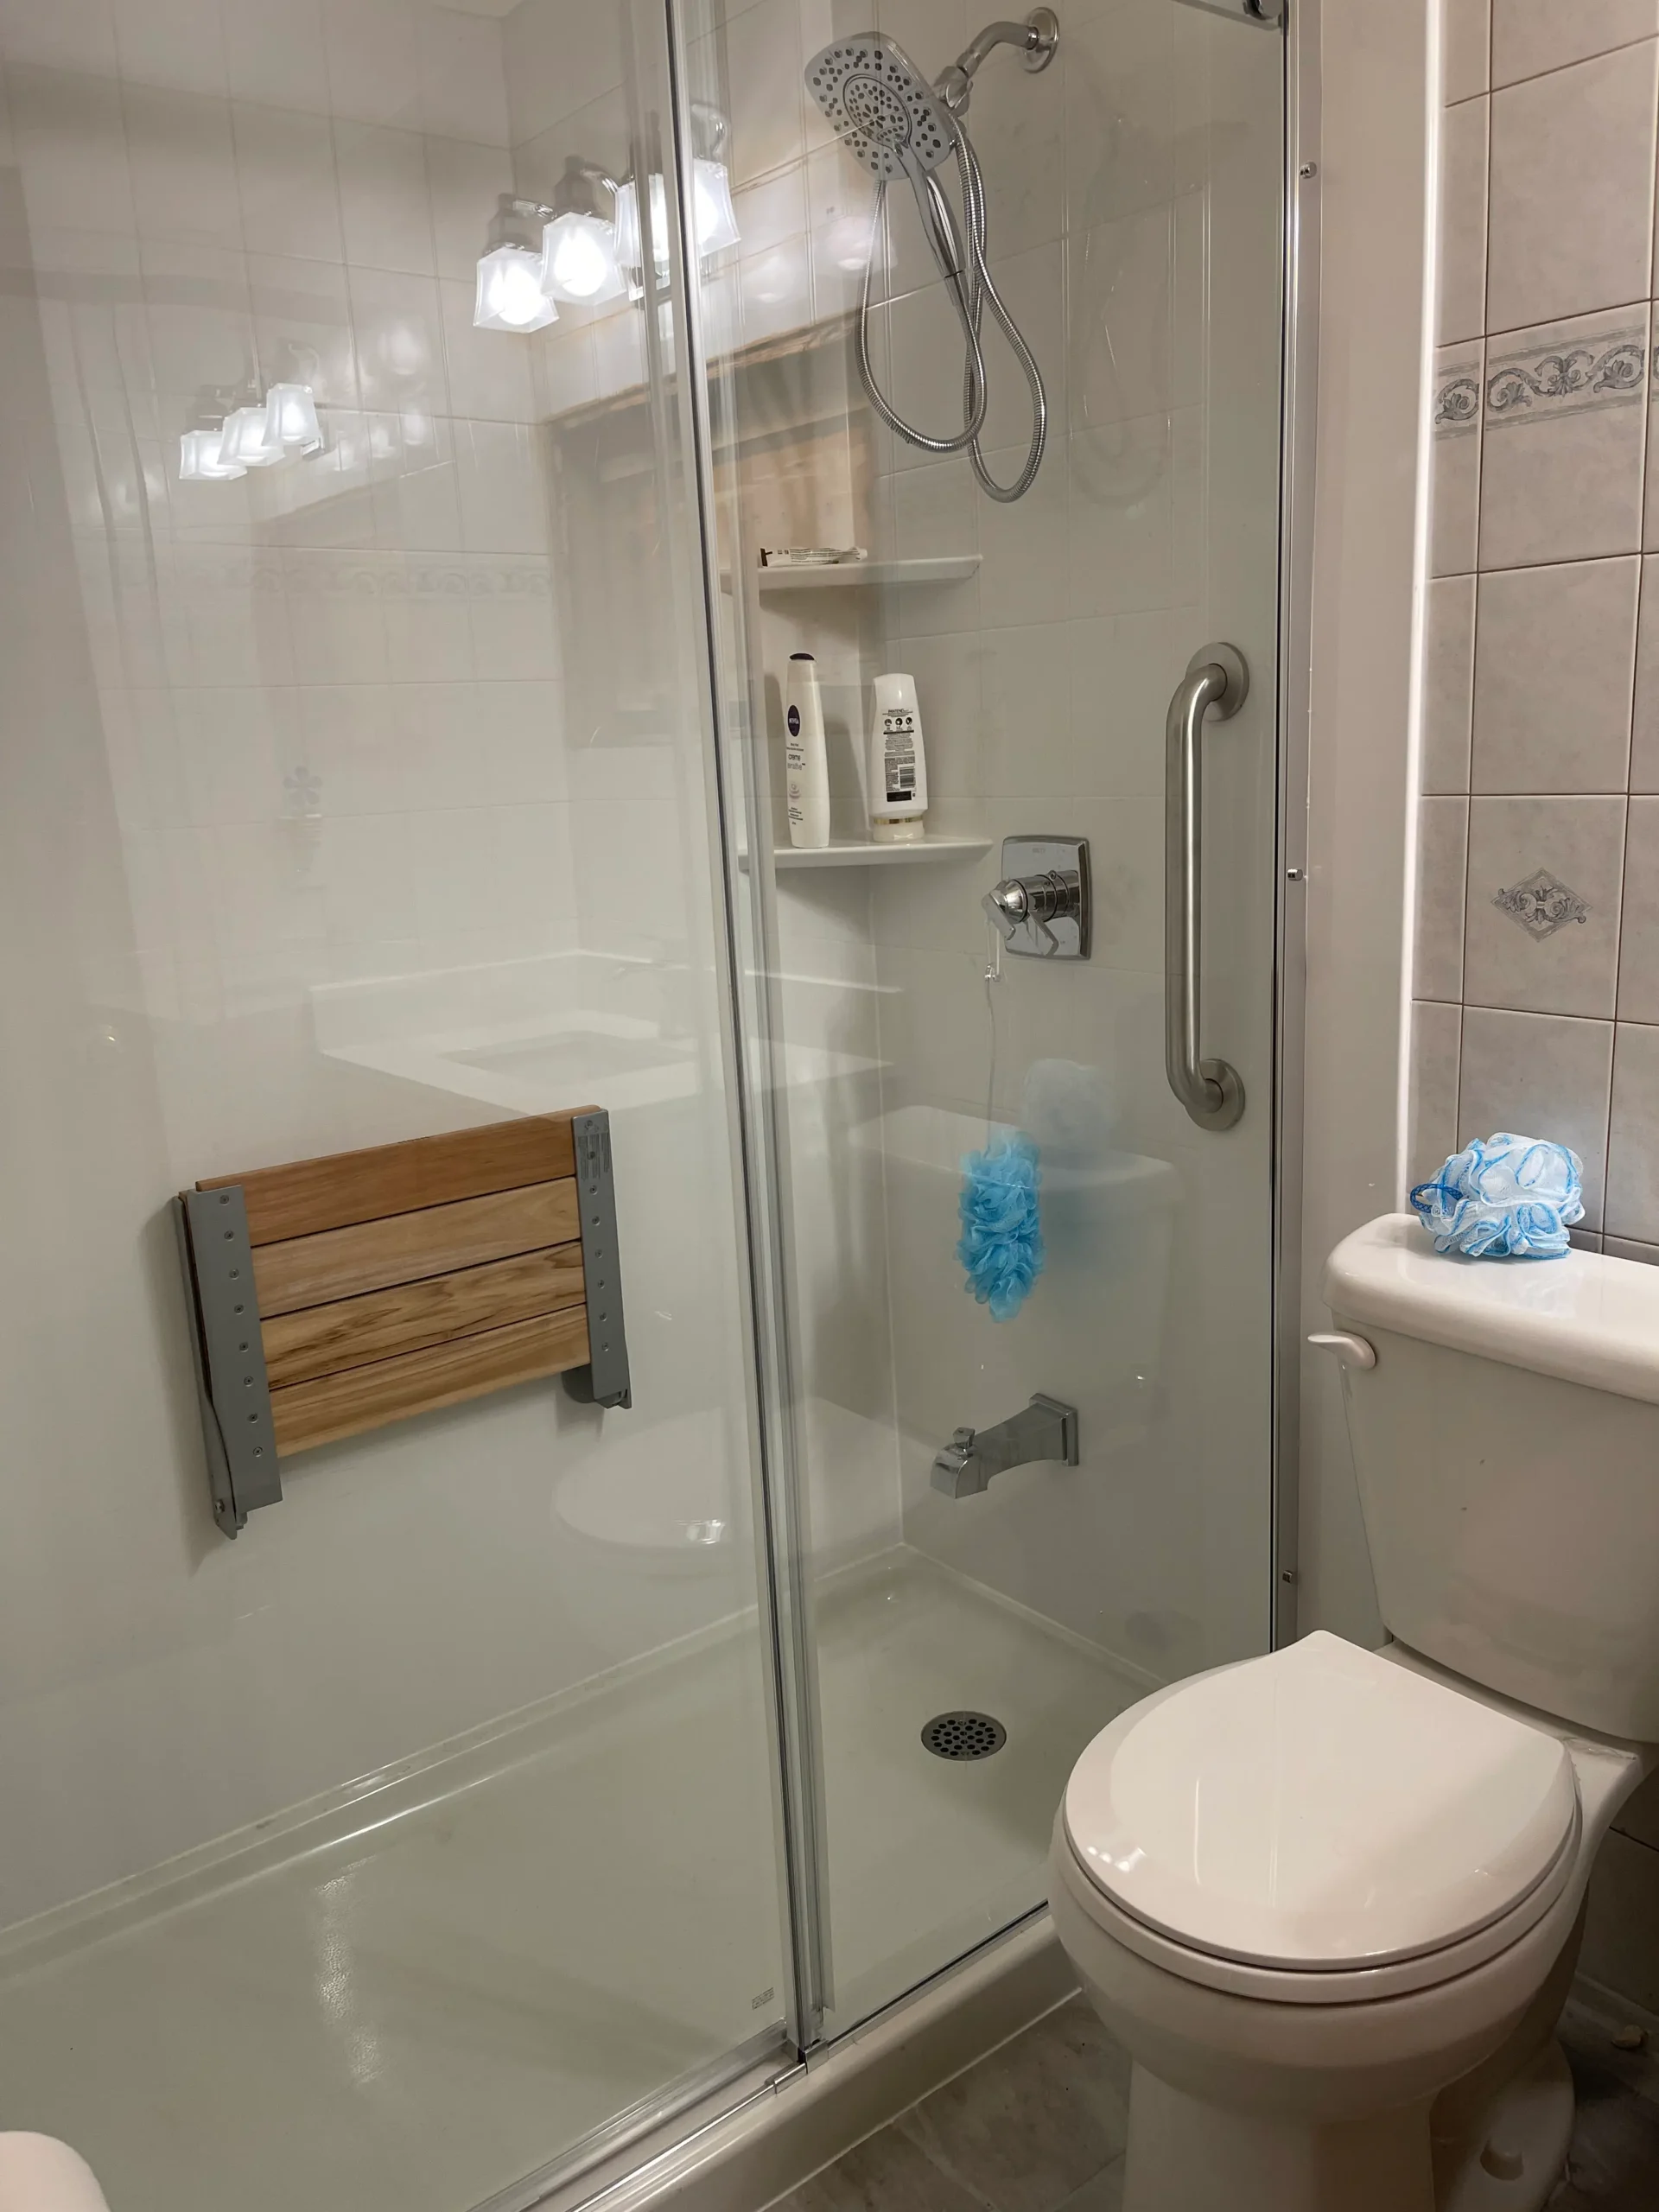 an image about A bathroom with a glass shower stall and acrylic panels for the walls.